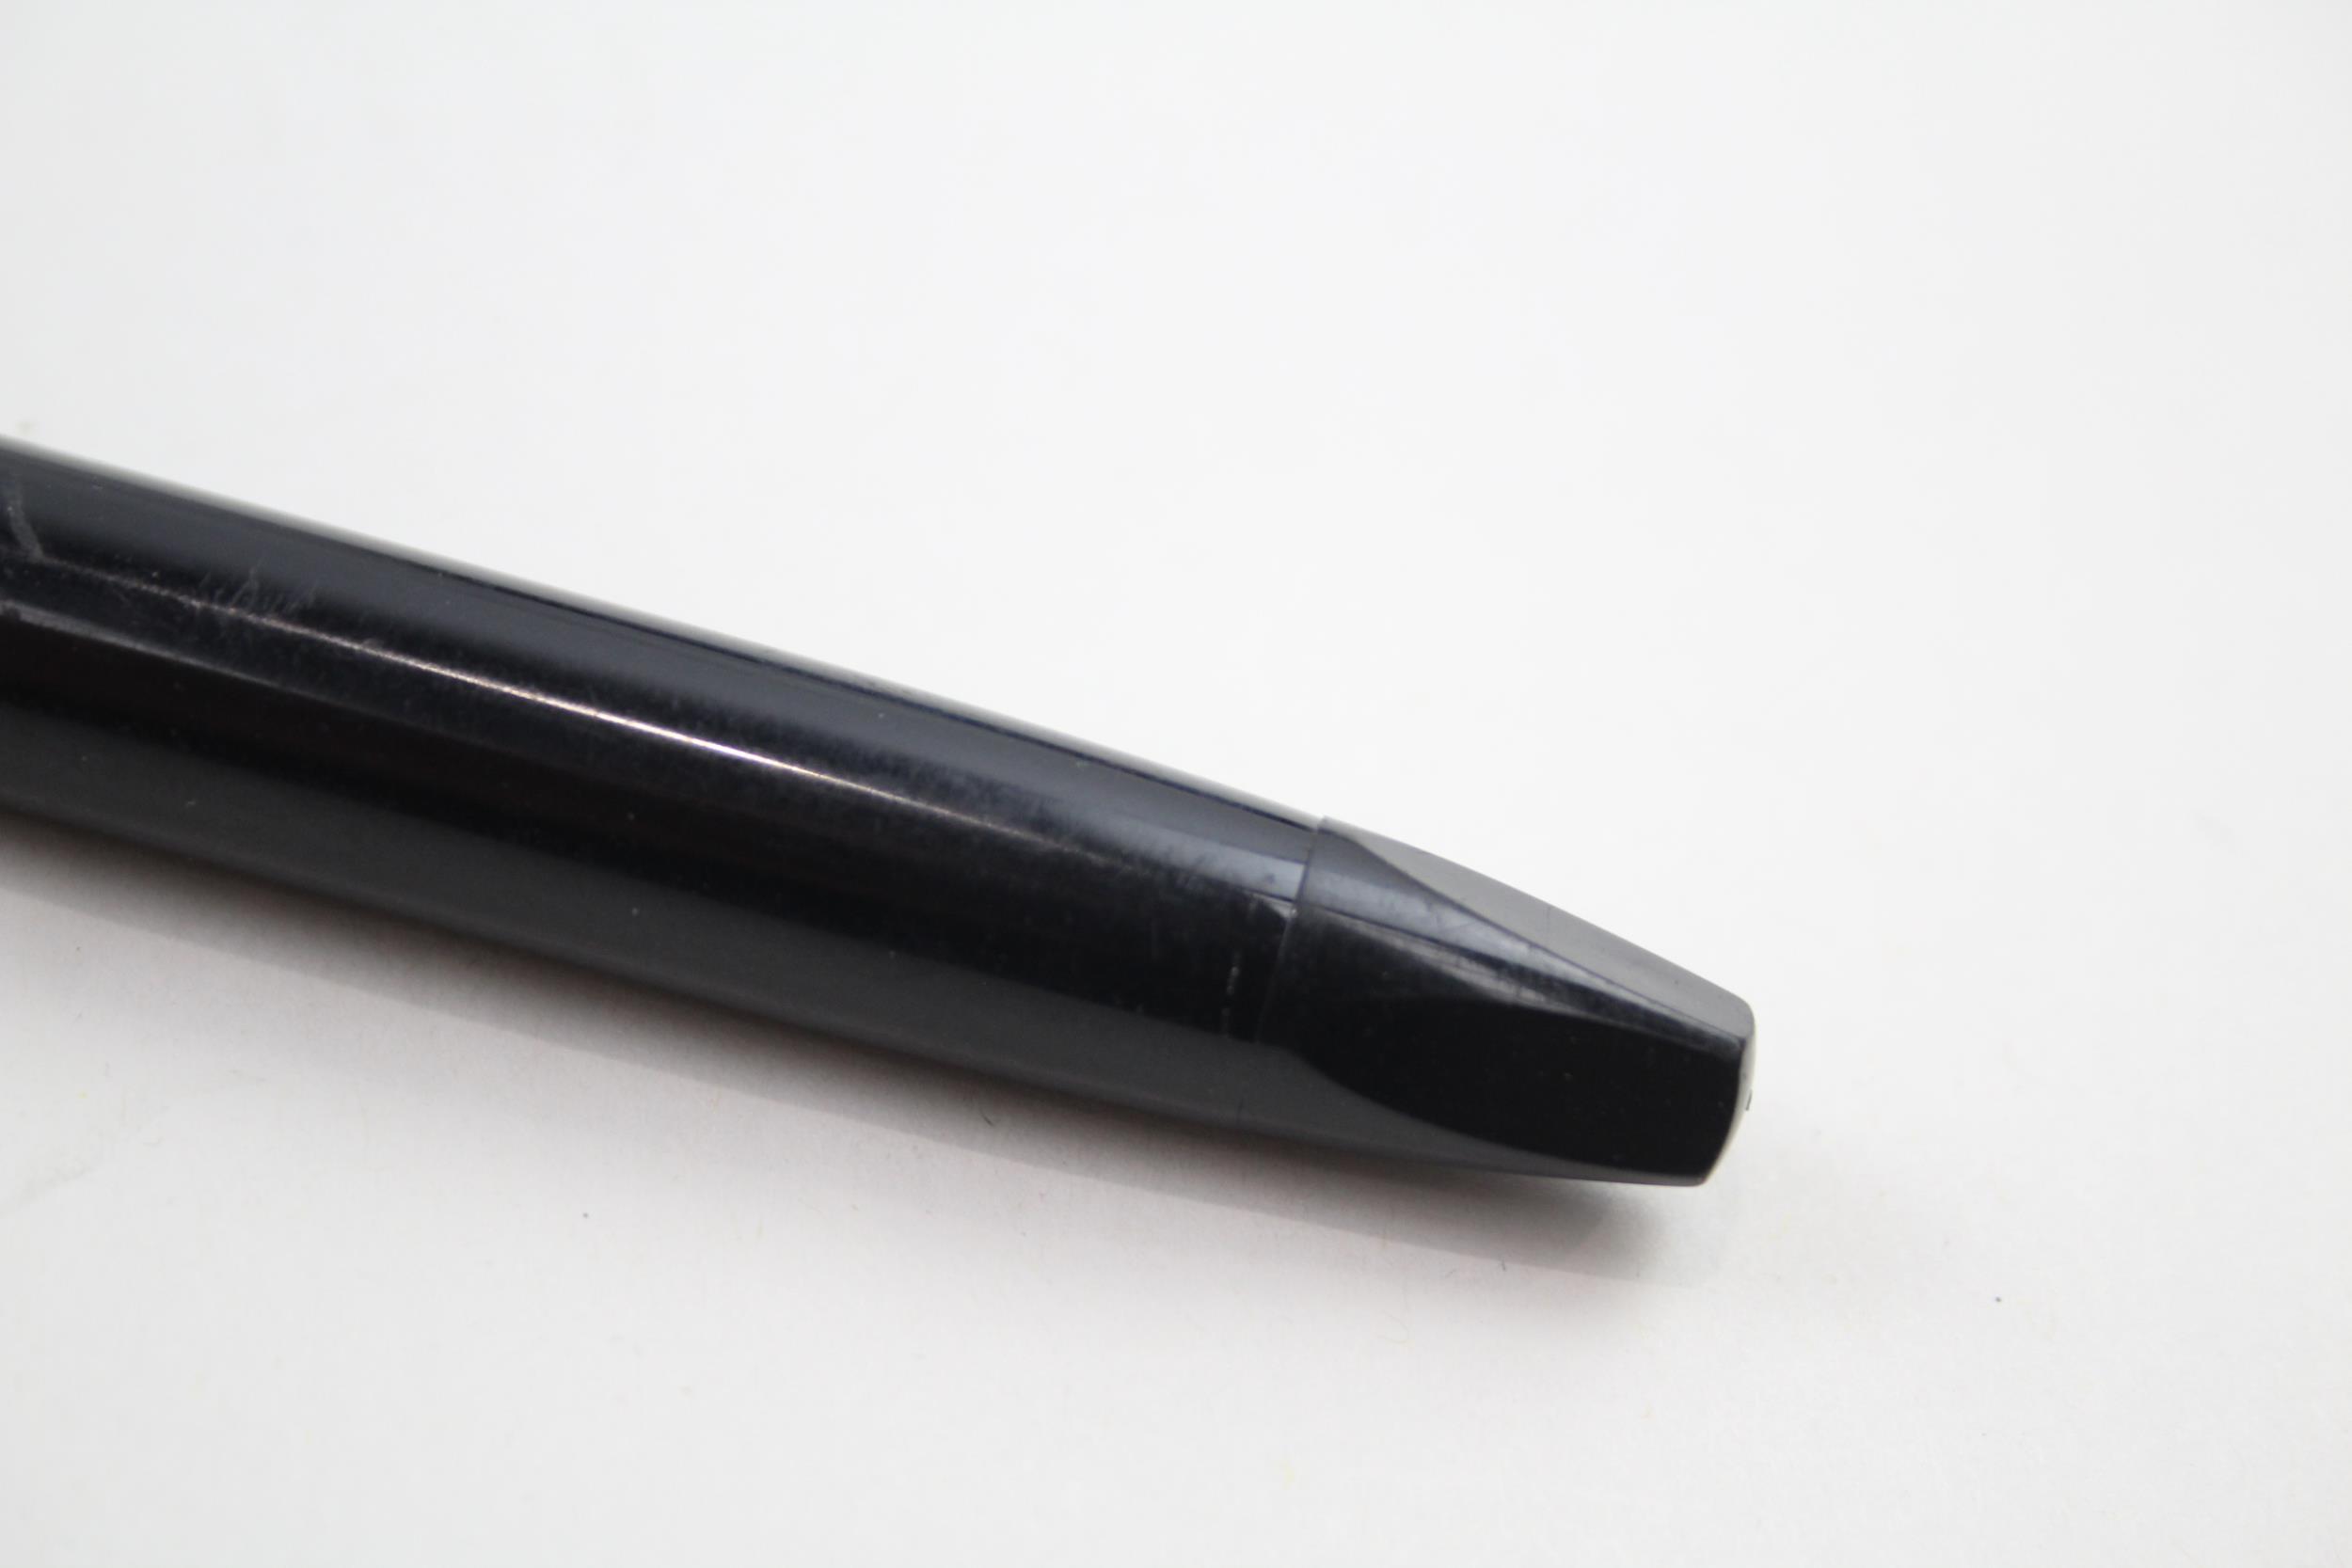 Chalk Marked SHEAFFERF PFM Pen For Men Black Fountain Pen 14ct Nib WRITING - Dip Tested & WRITING In - Image 3 of 9